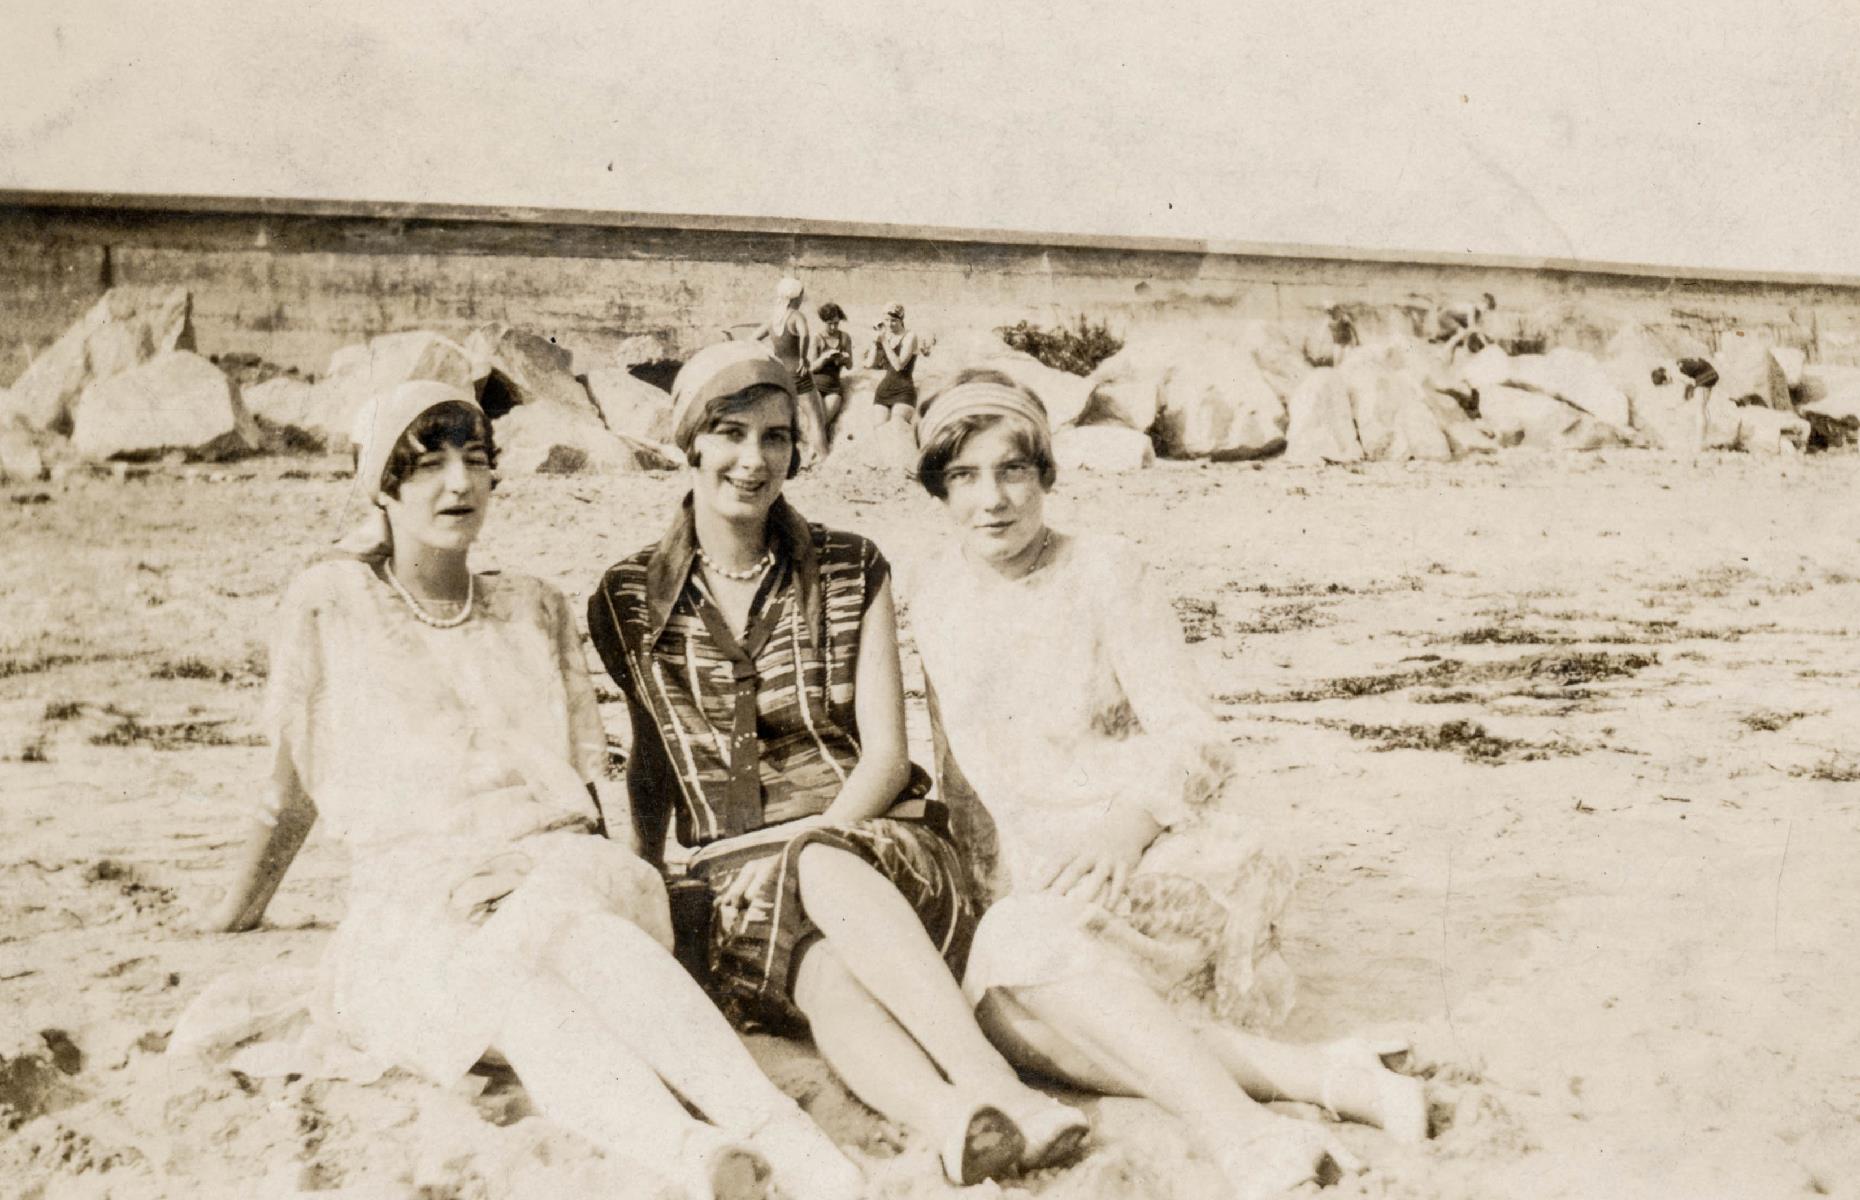 These finely dressed sunbathers are also basking on a Massachusetts strand. Set against a backdrop of rugged rocks and powder-fine sand, this trio of women sit on a beach near Marblehead in Essex County in the 1920s.